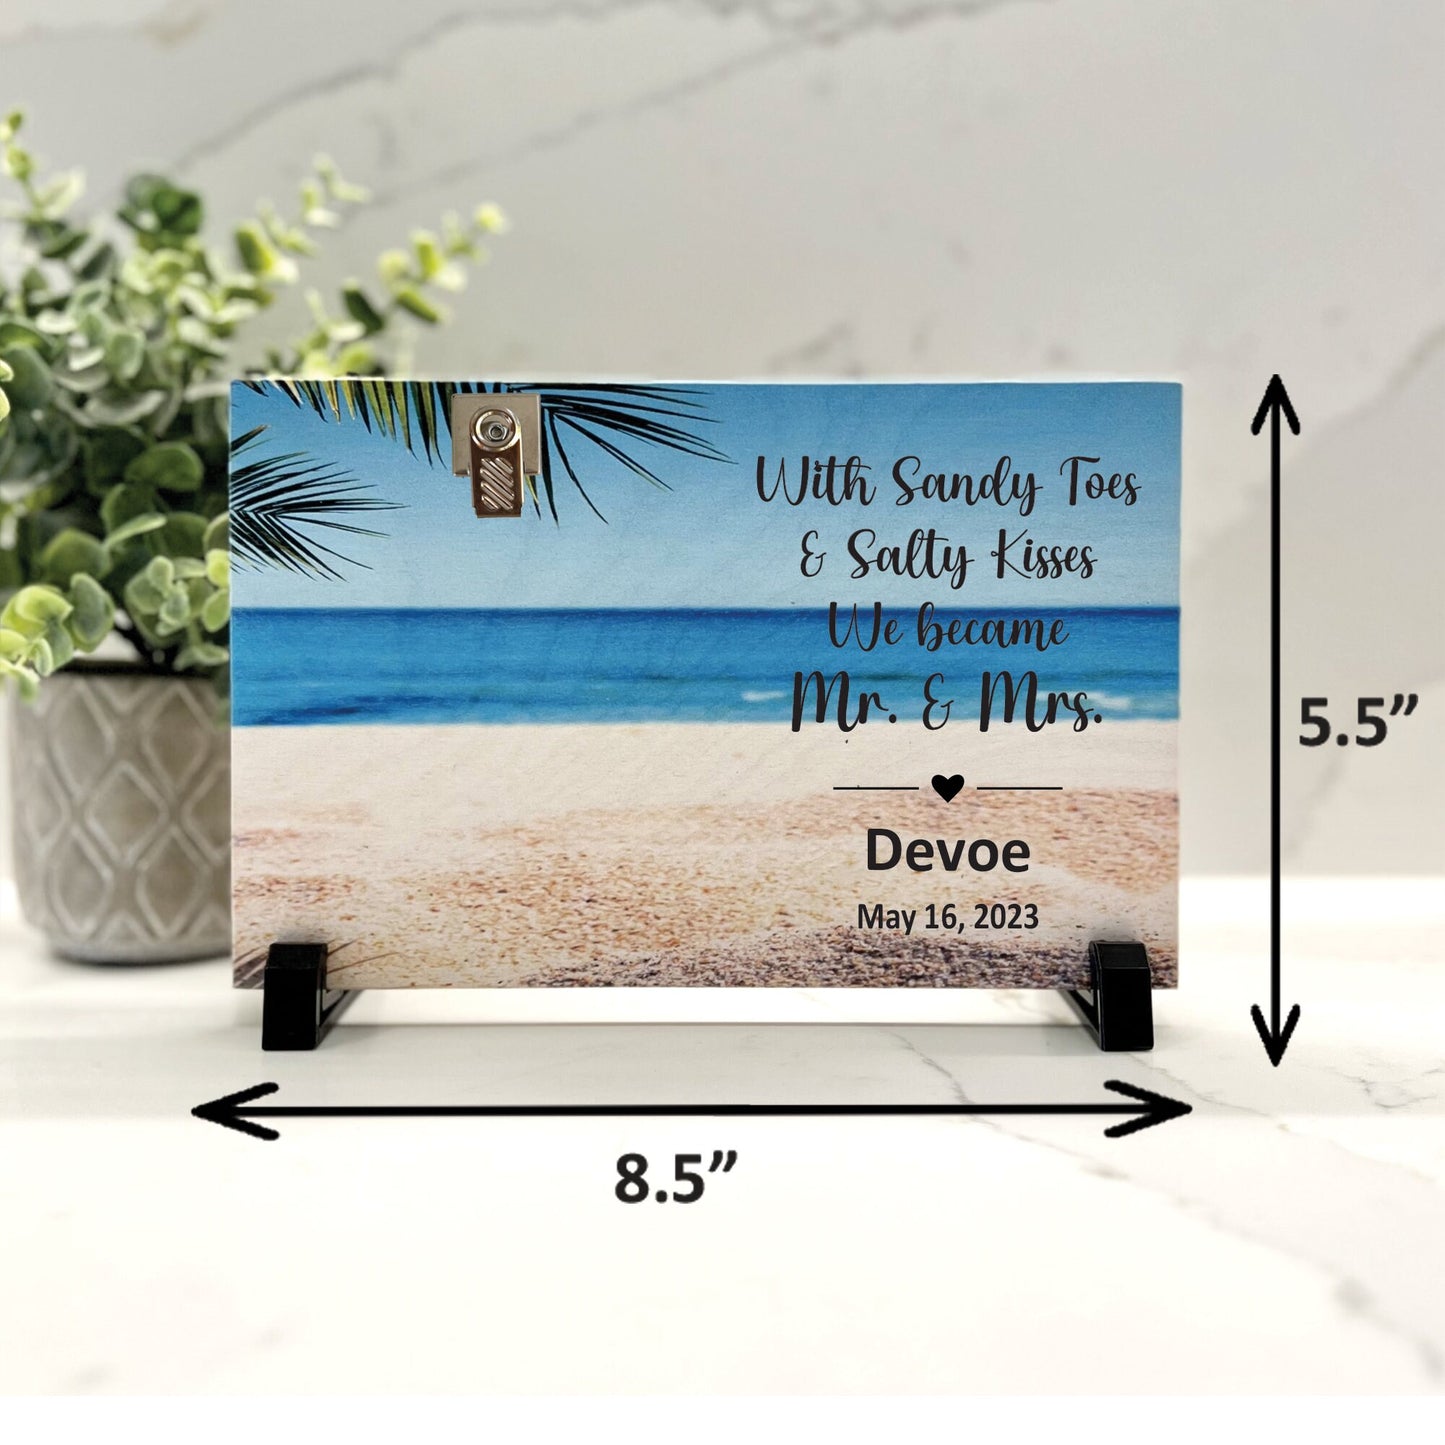 Sandy Toes and Salty Kisses Personalized Wedding Picture Frame, Beach Wedding Gift, Custom wood frame for newlyweds, New Mr. and Mrs. Gift